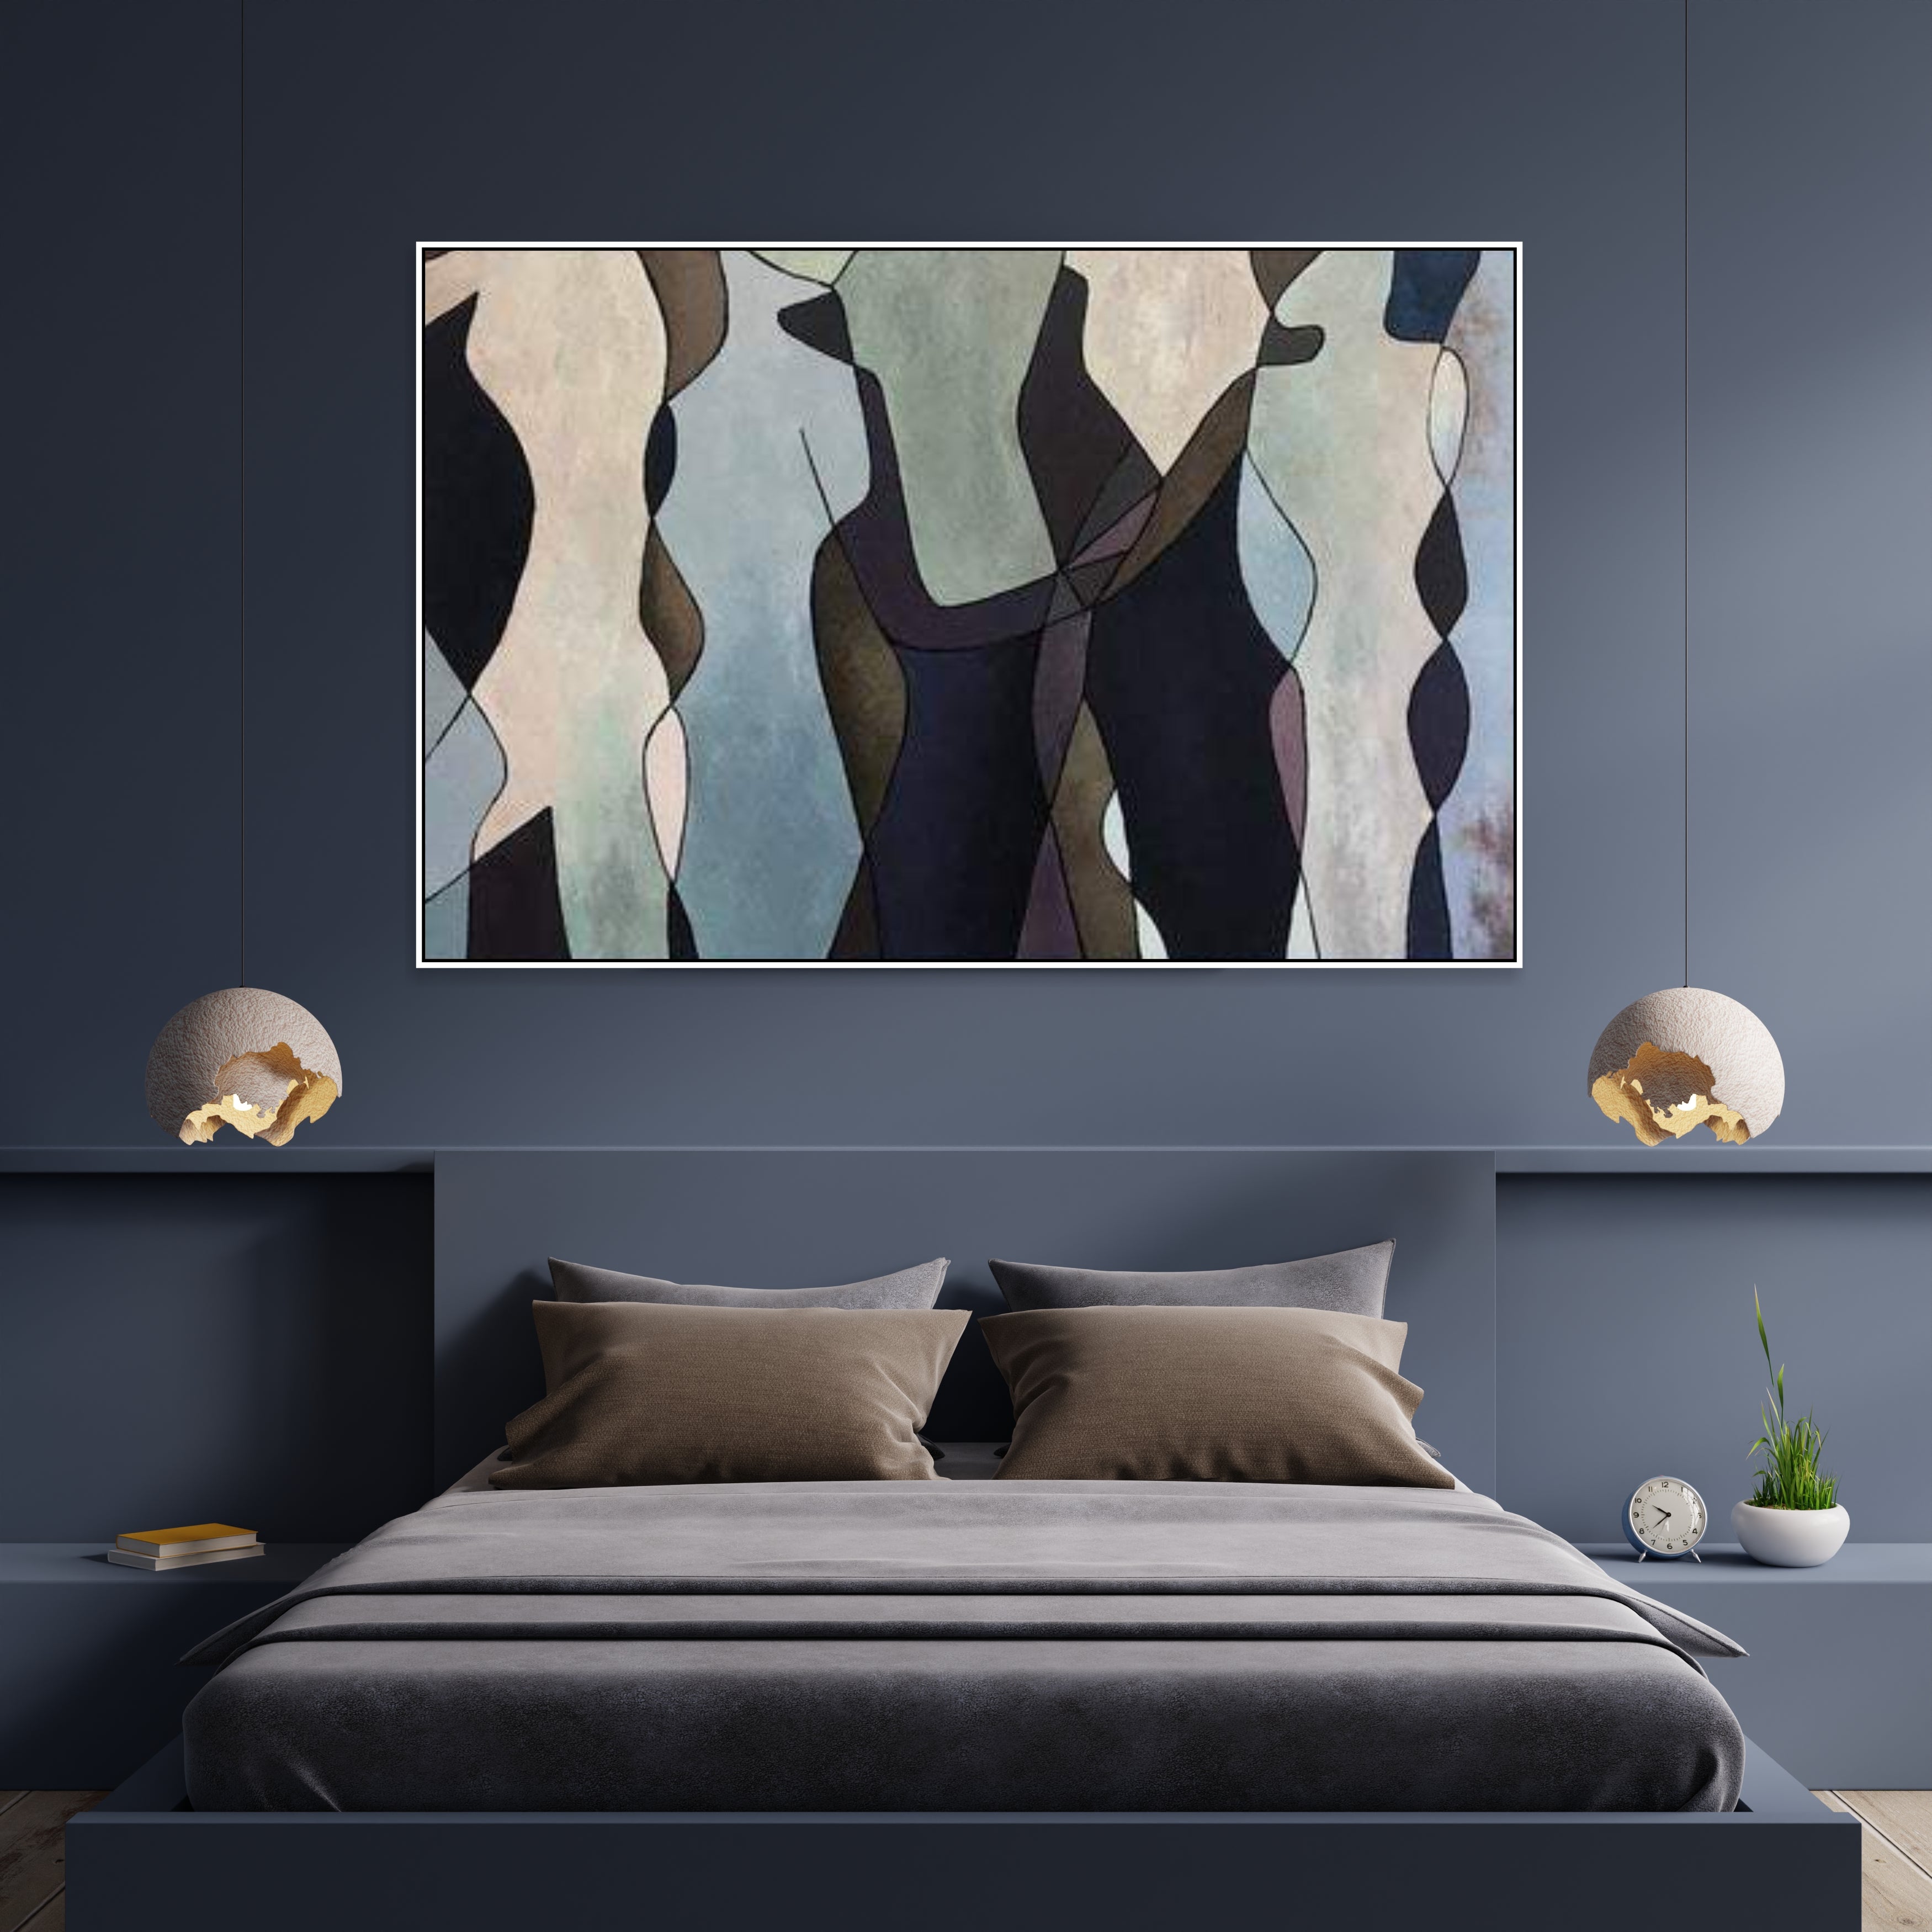 What Paintings Are The Best to Have In a Master Bedroom In Feng Shui? slider2-image-3